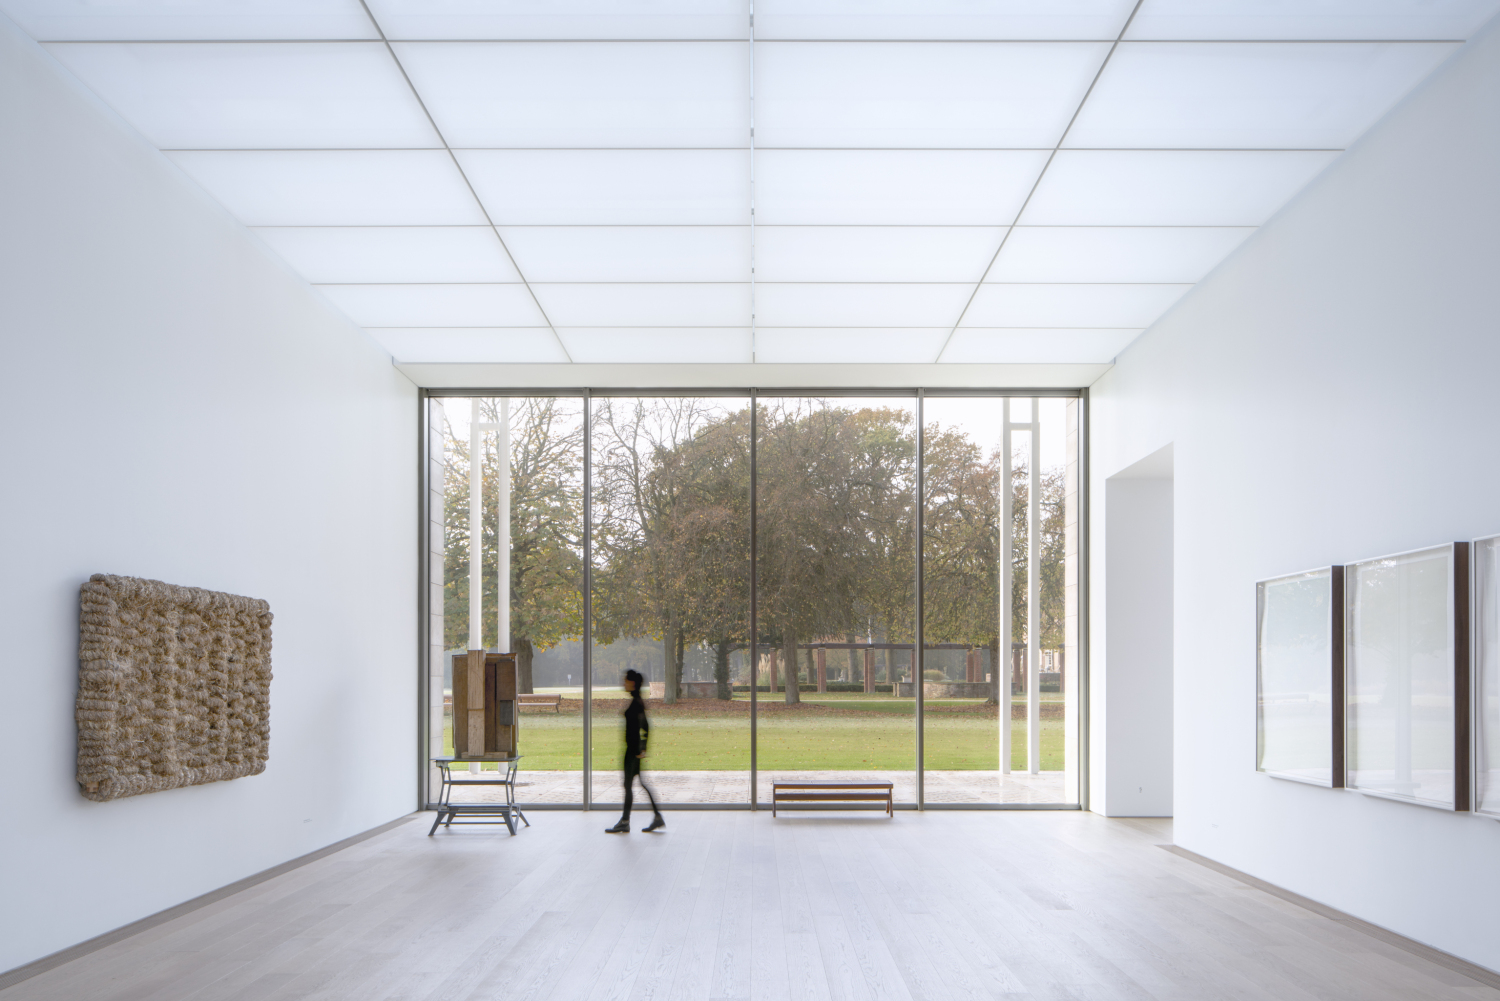 Museum Voorlinden is among the nominees for Dutch Daylight Award 2018